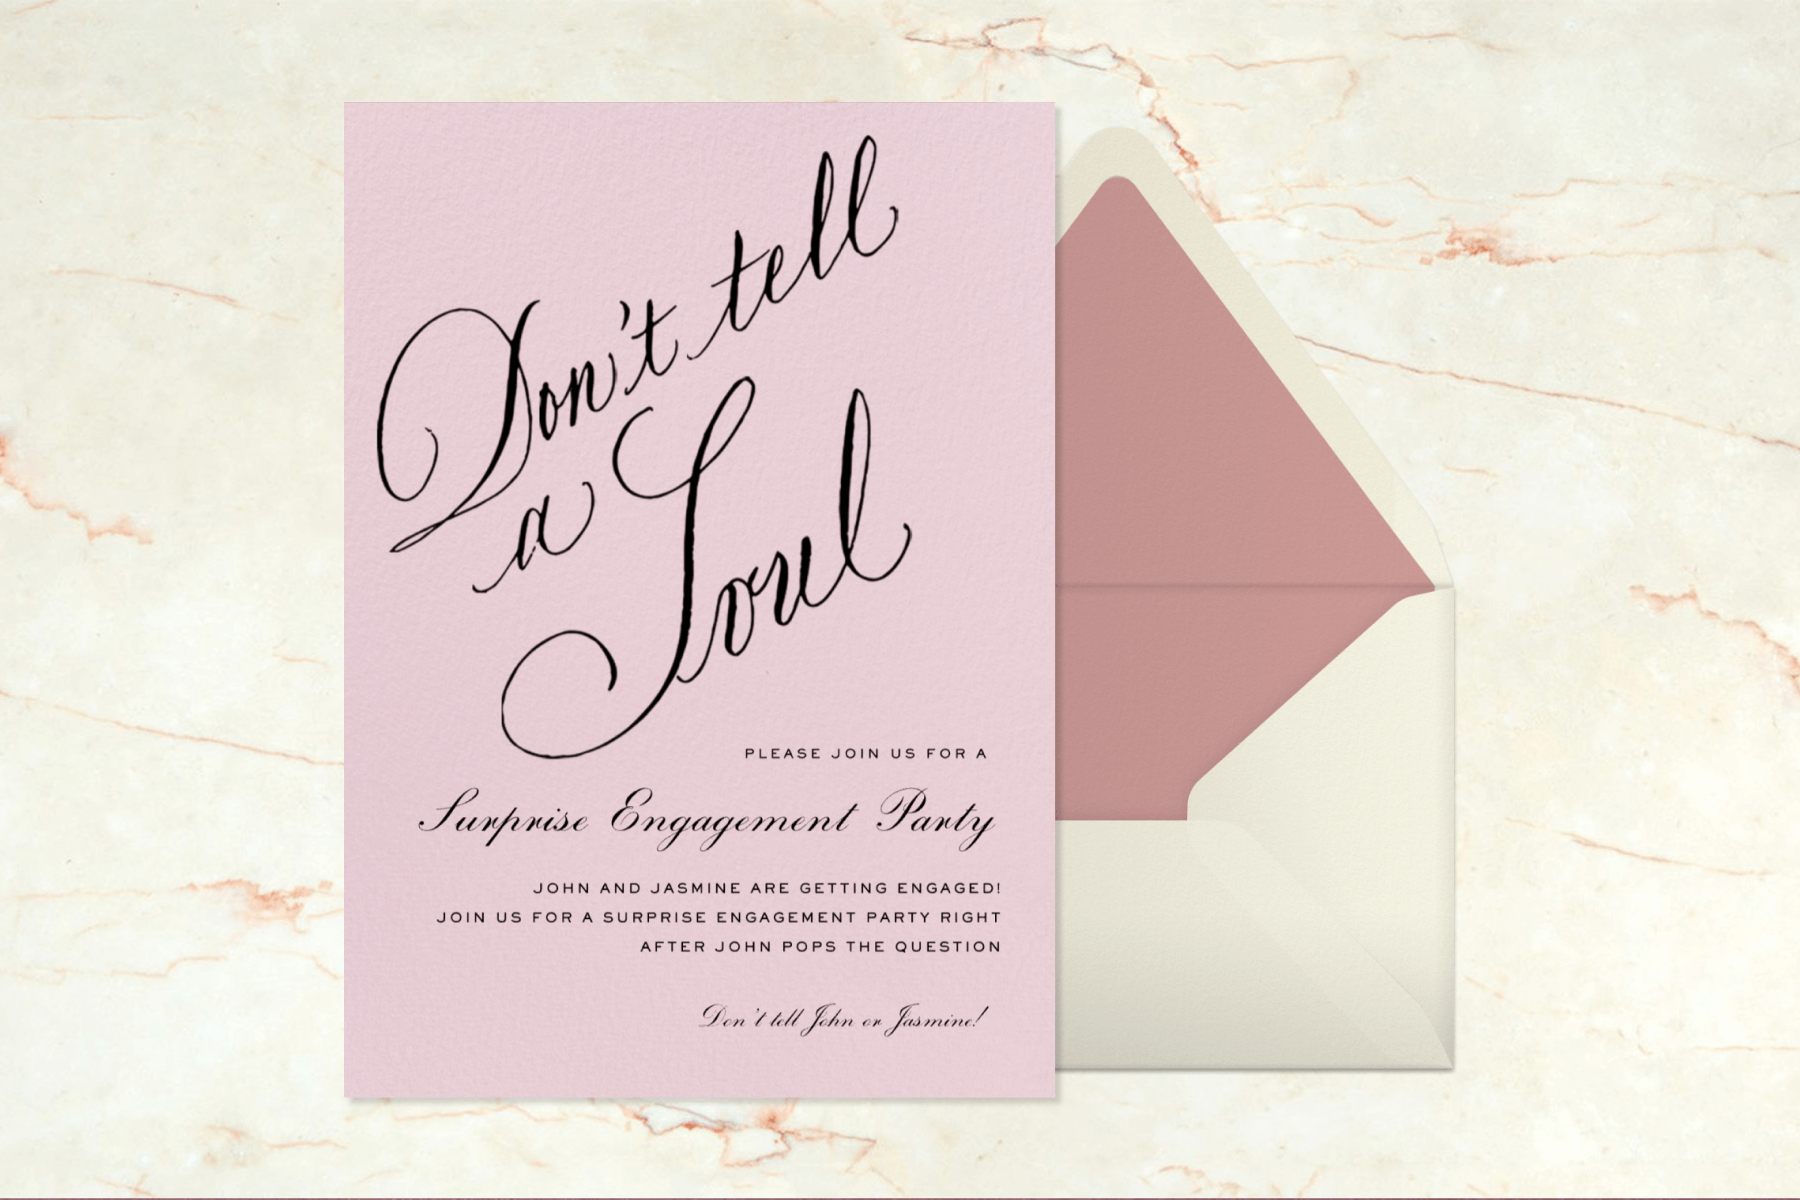 A blush engagement party invitation with large calligraphic text that reads “Don’t tell a Soul” paired with a cream and pink envelope.